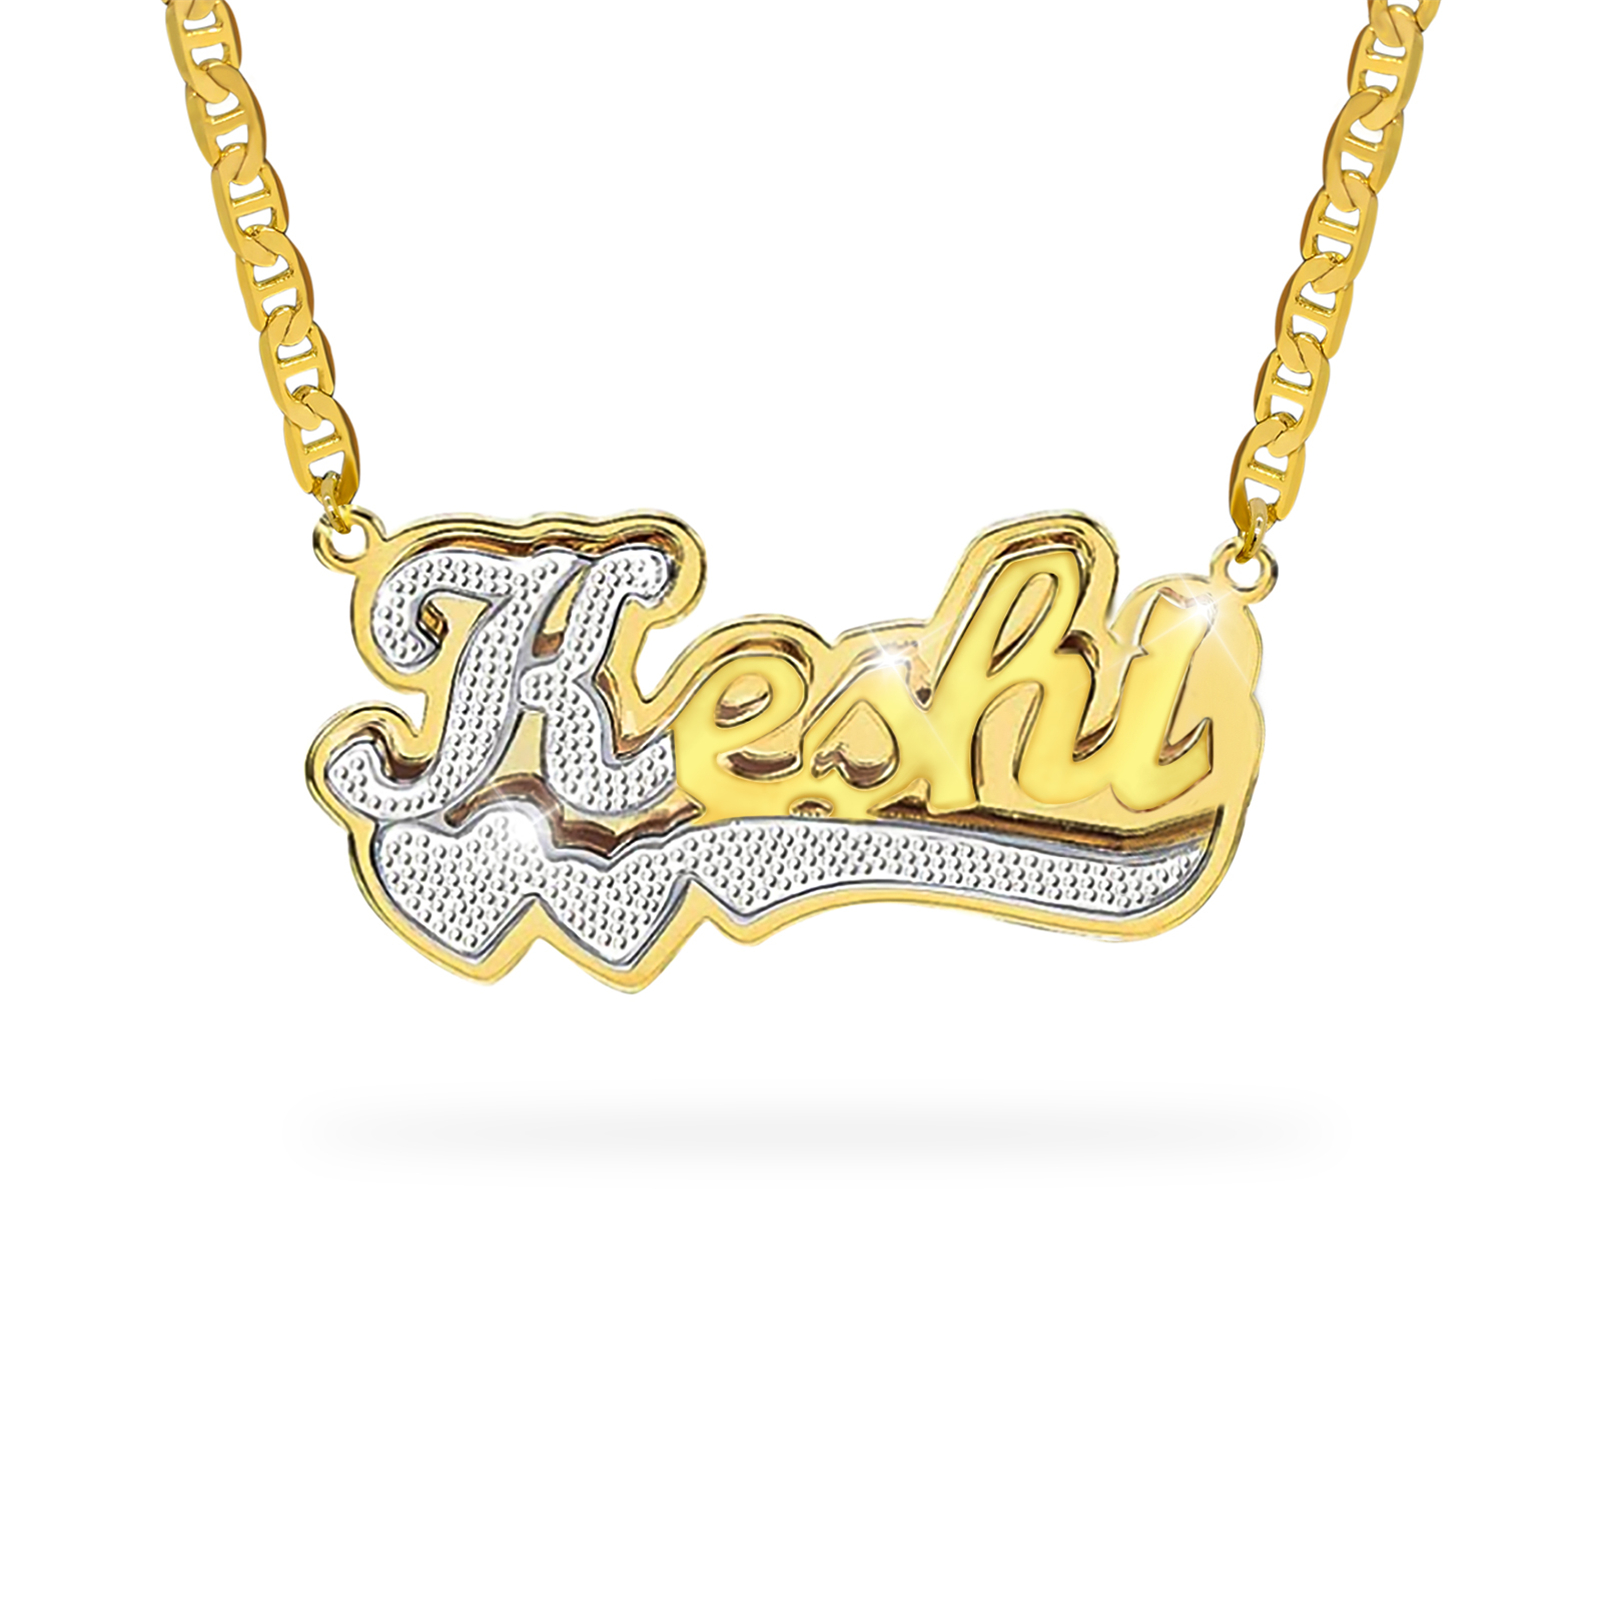 NL4-6 Double Plated Name Necklace Personalized Custom Nameplate Pendant Necklace